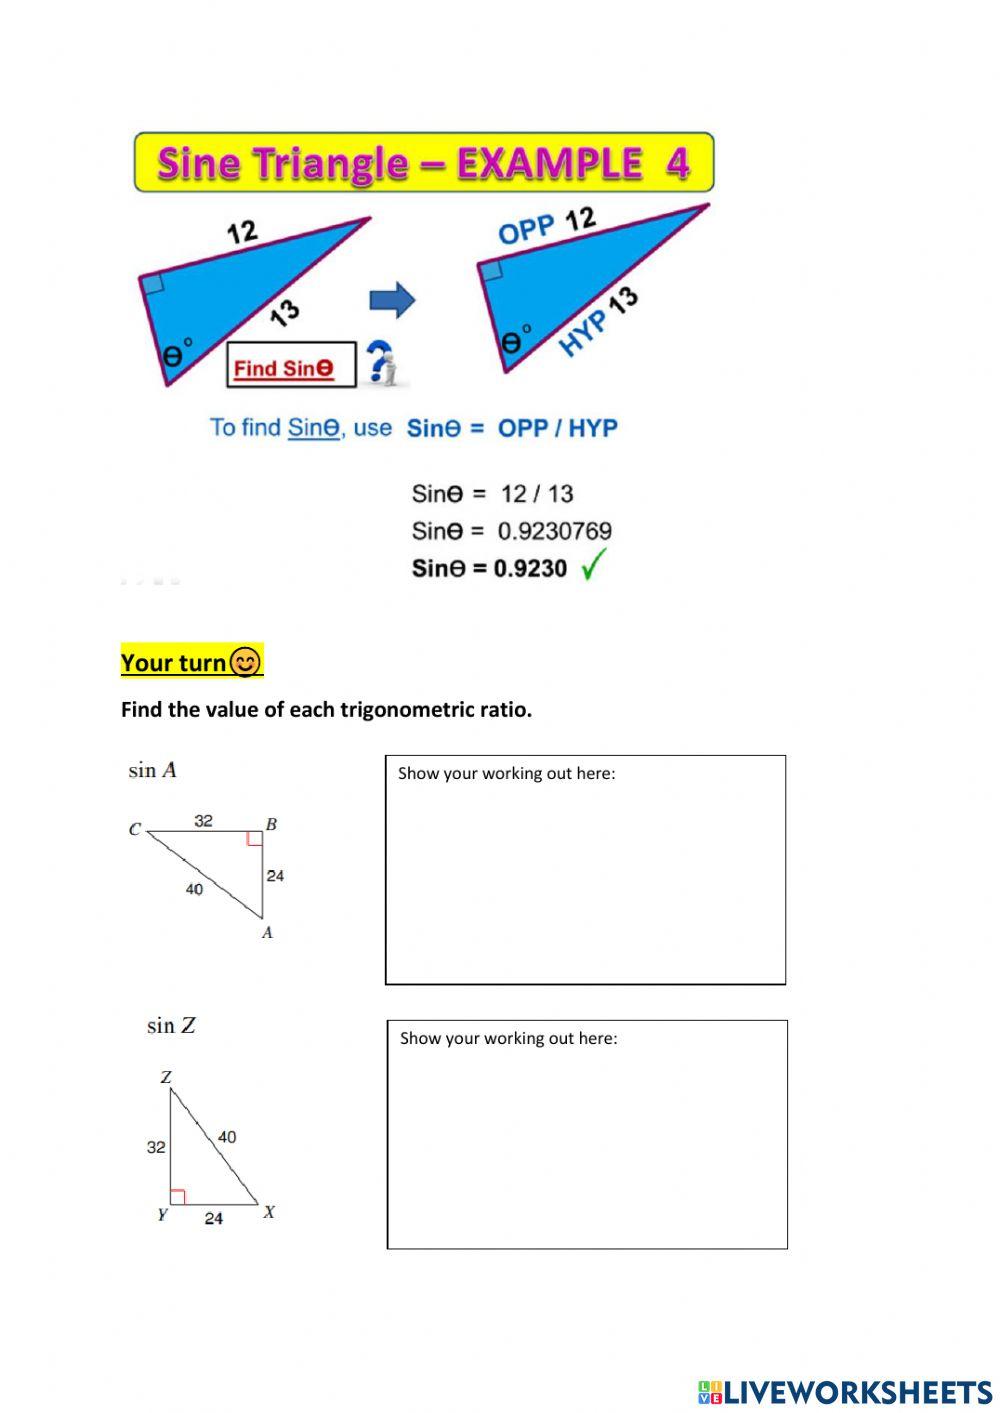 Trigonometric Ratios-Notes and Practise Questions